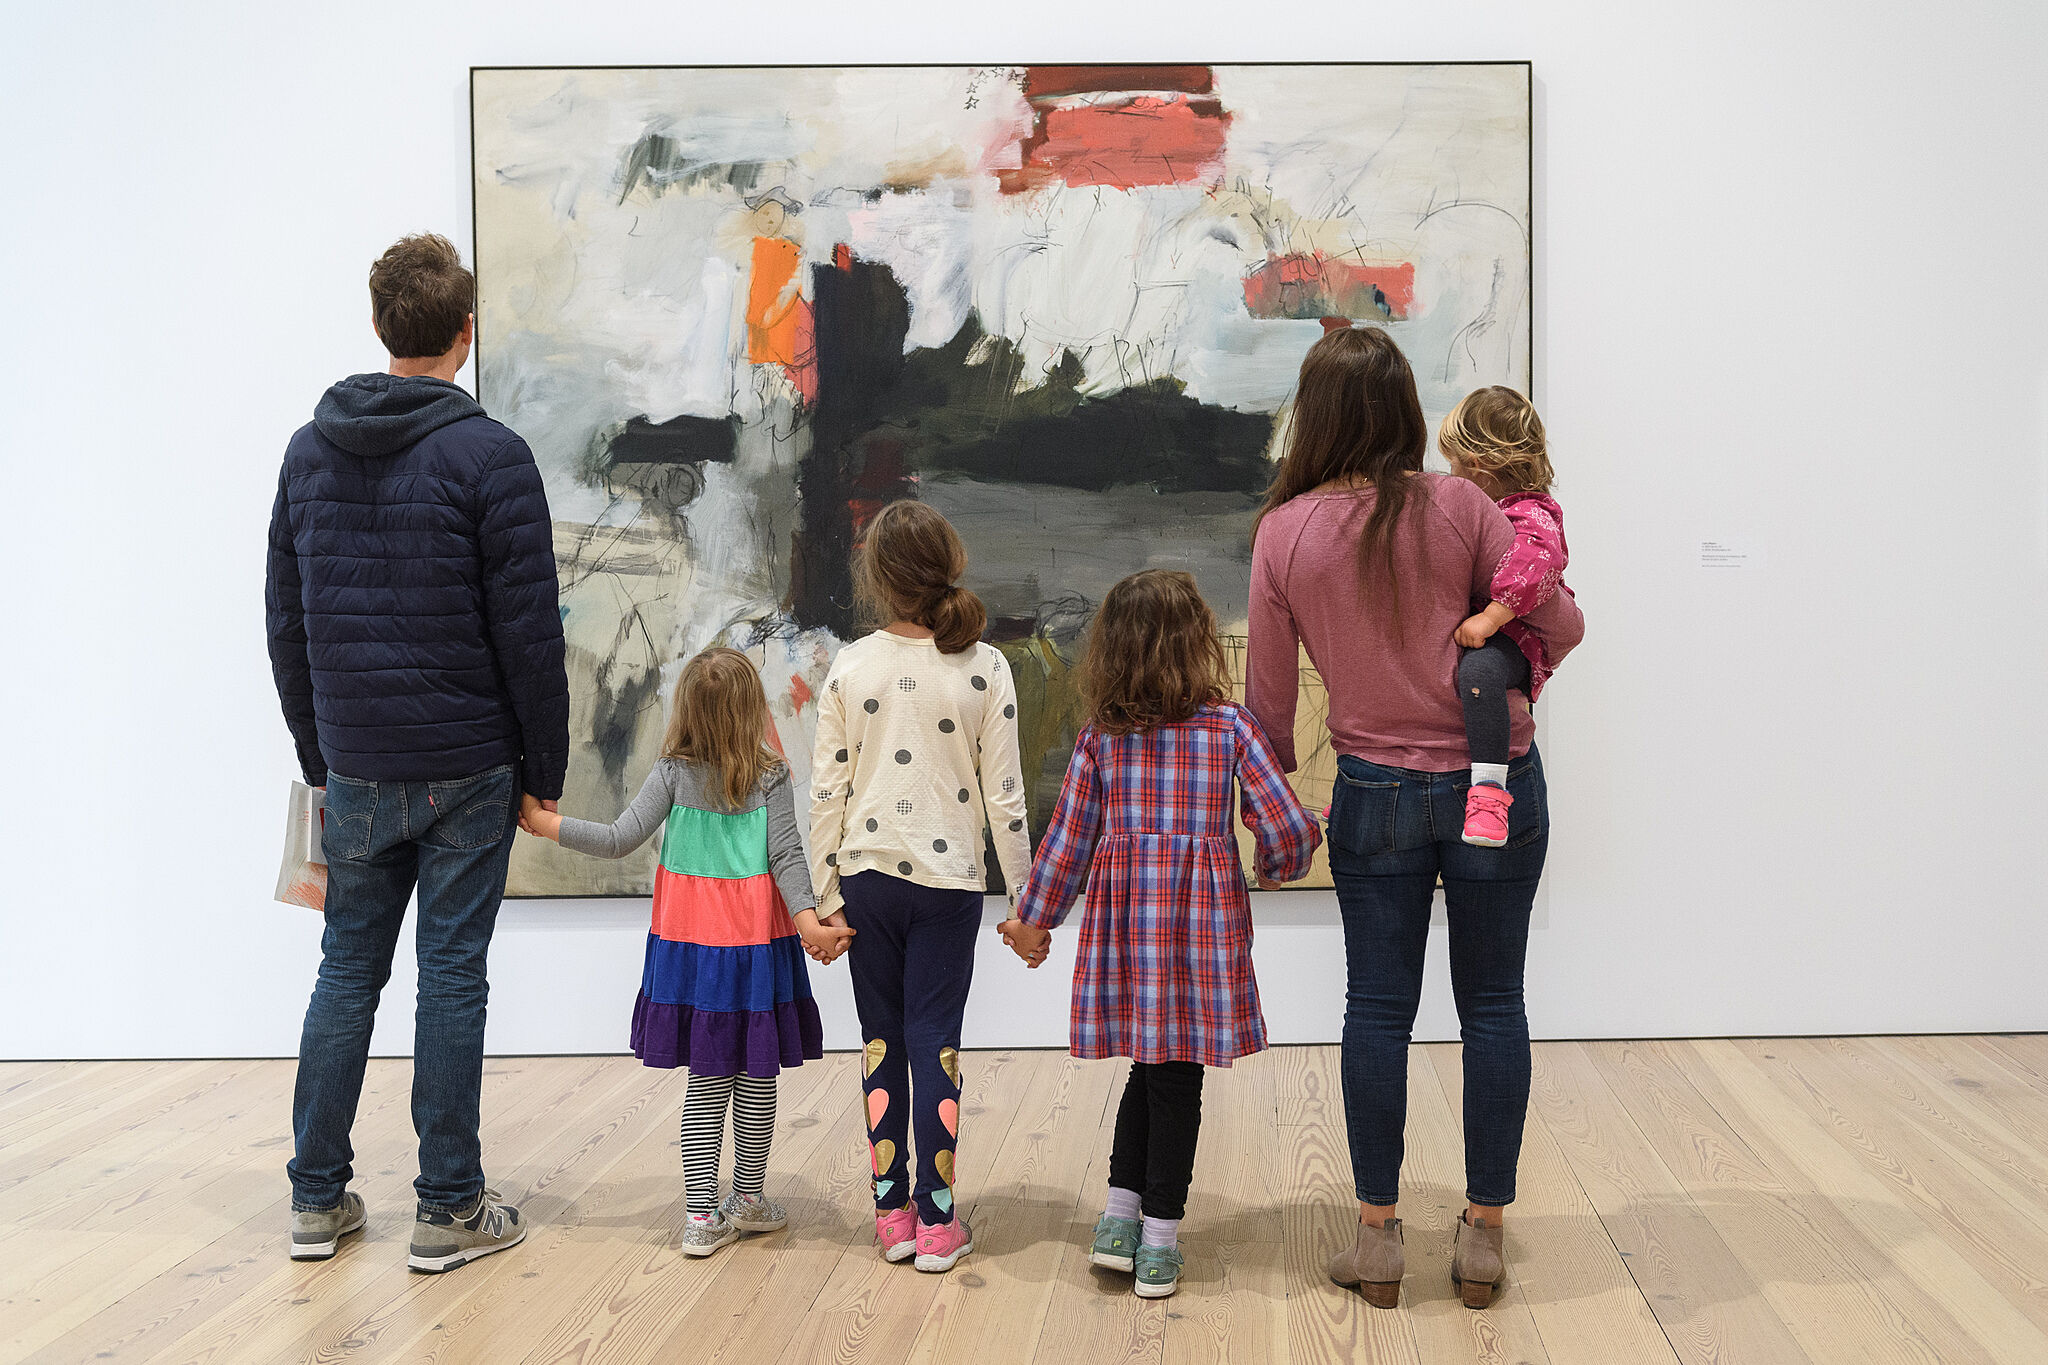 A family exploring an artwork together.